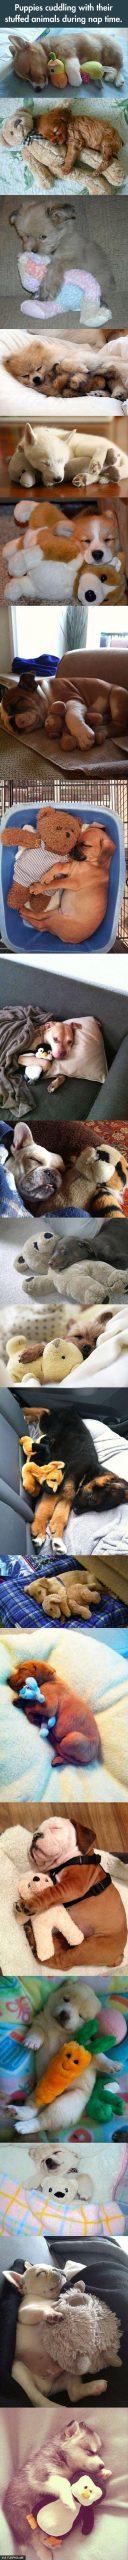 Puppies cuddling with their toy animals